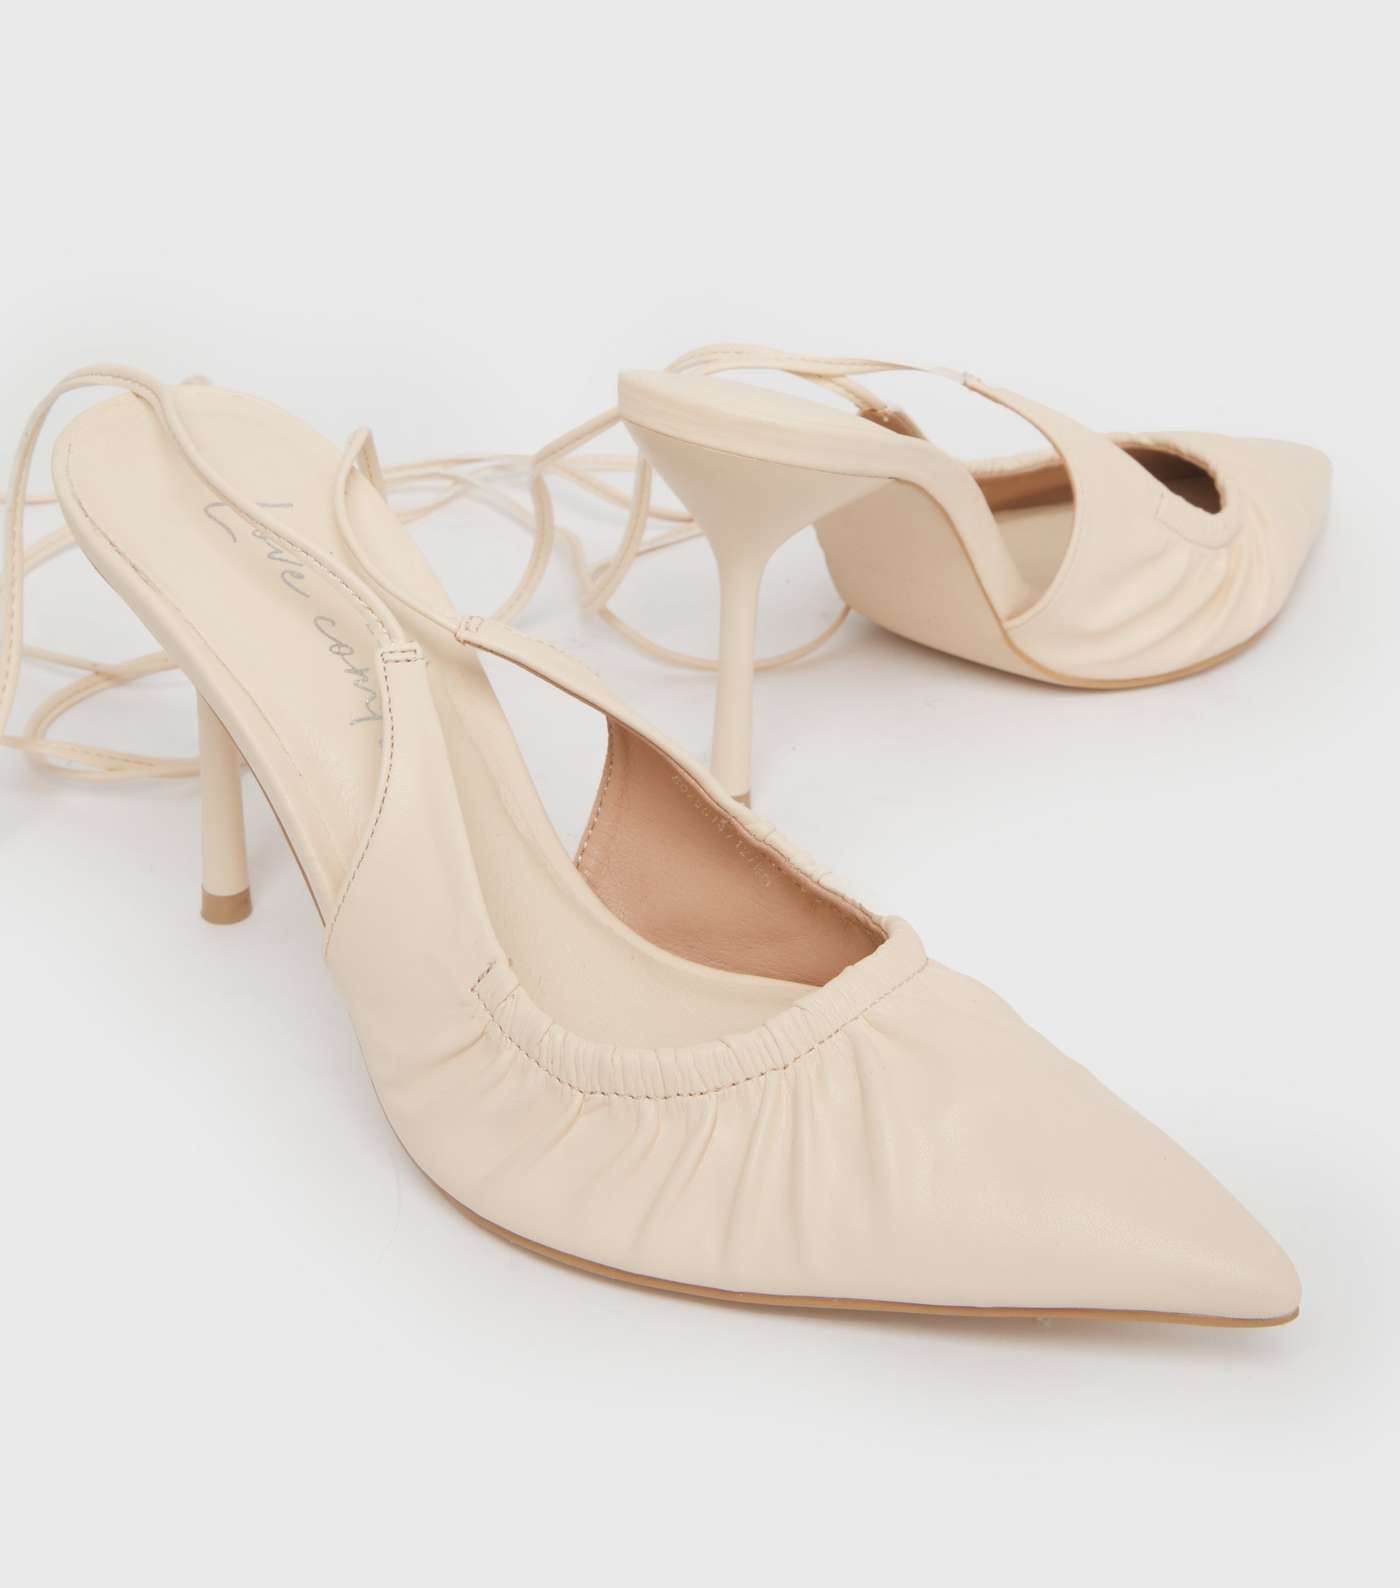 Off White Ruched Pointed Tie Stiletto Heel Court Shoes Image 3